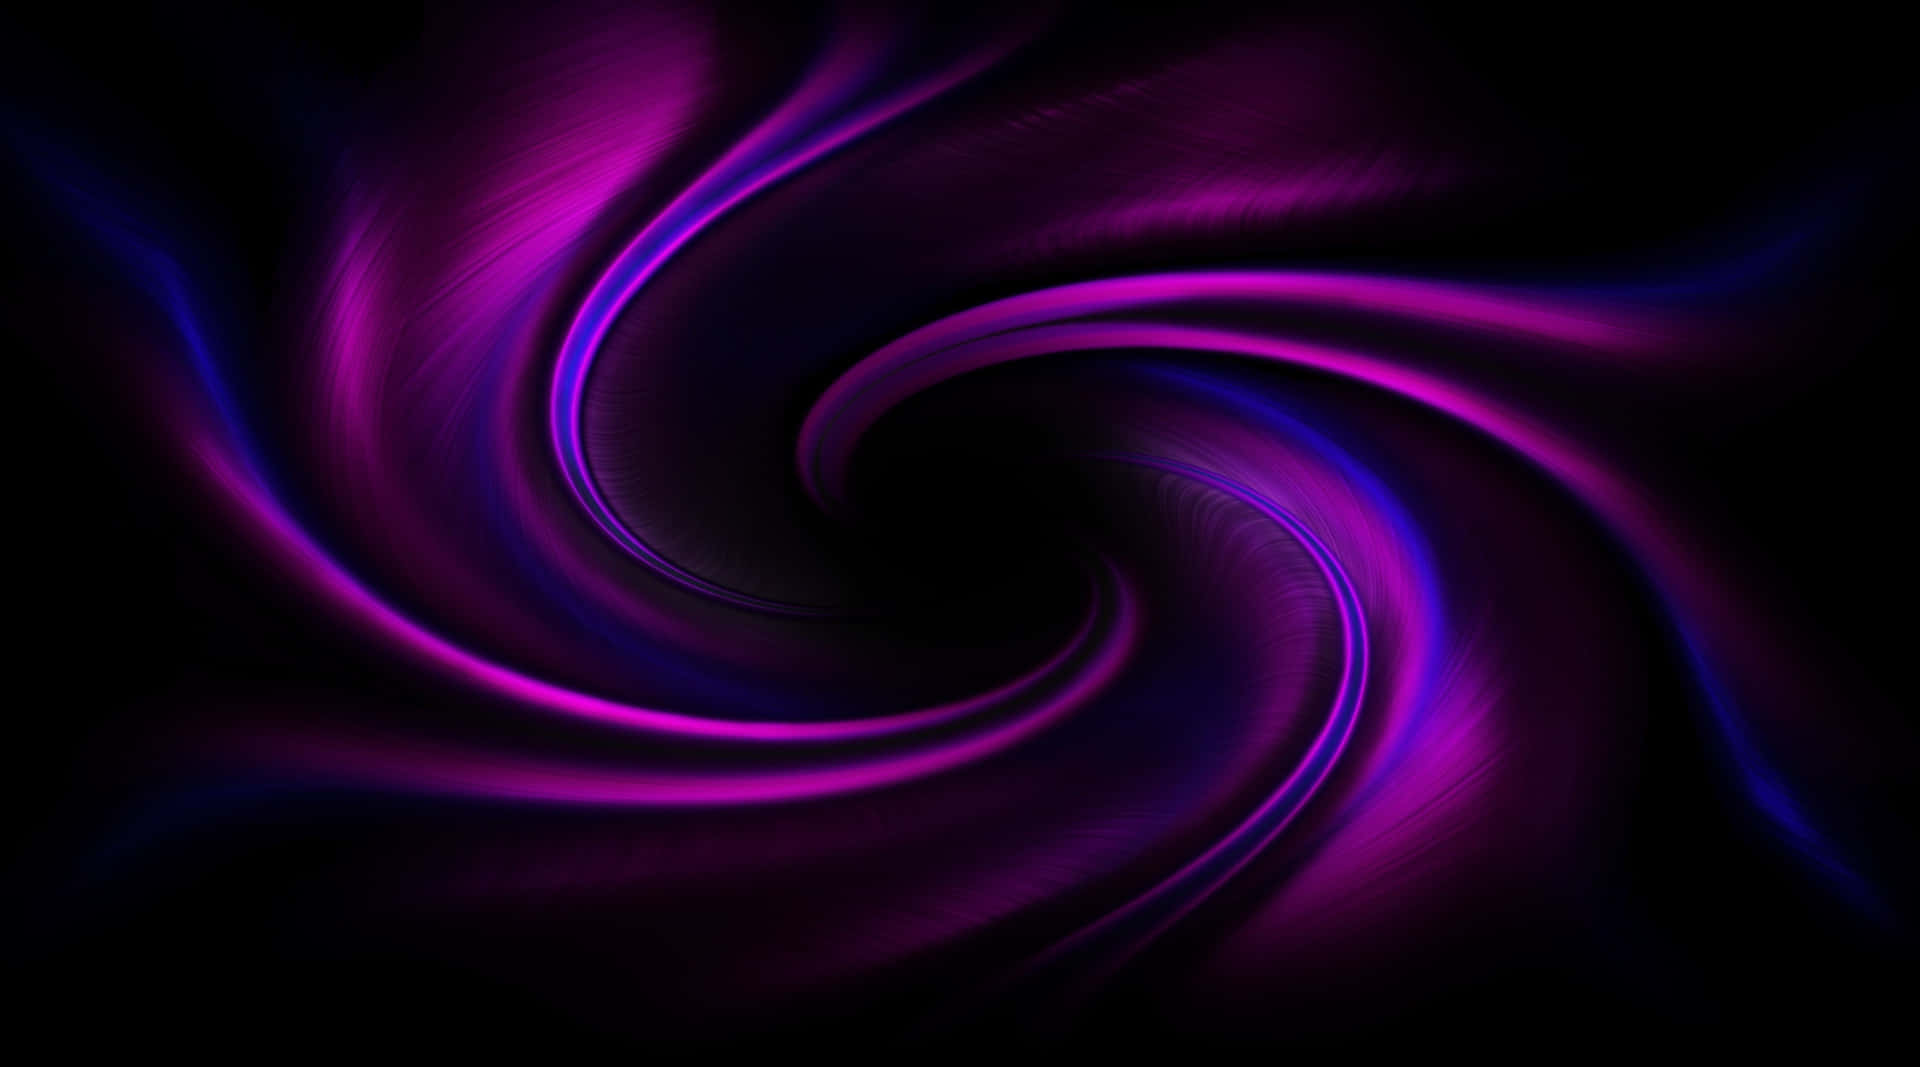 A swirl of blue and purple highlights in a mesmerizing background.